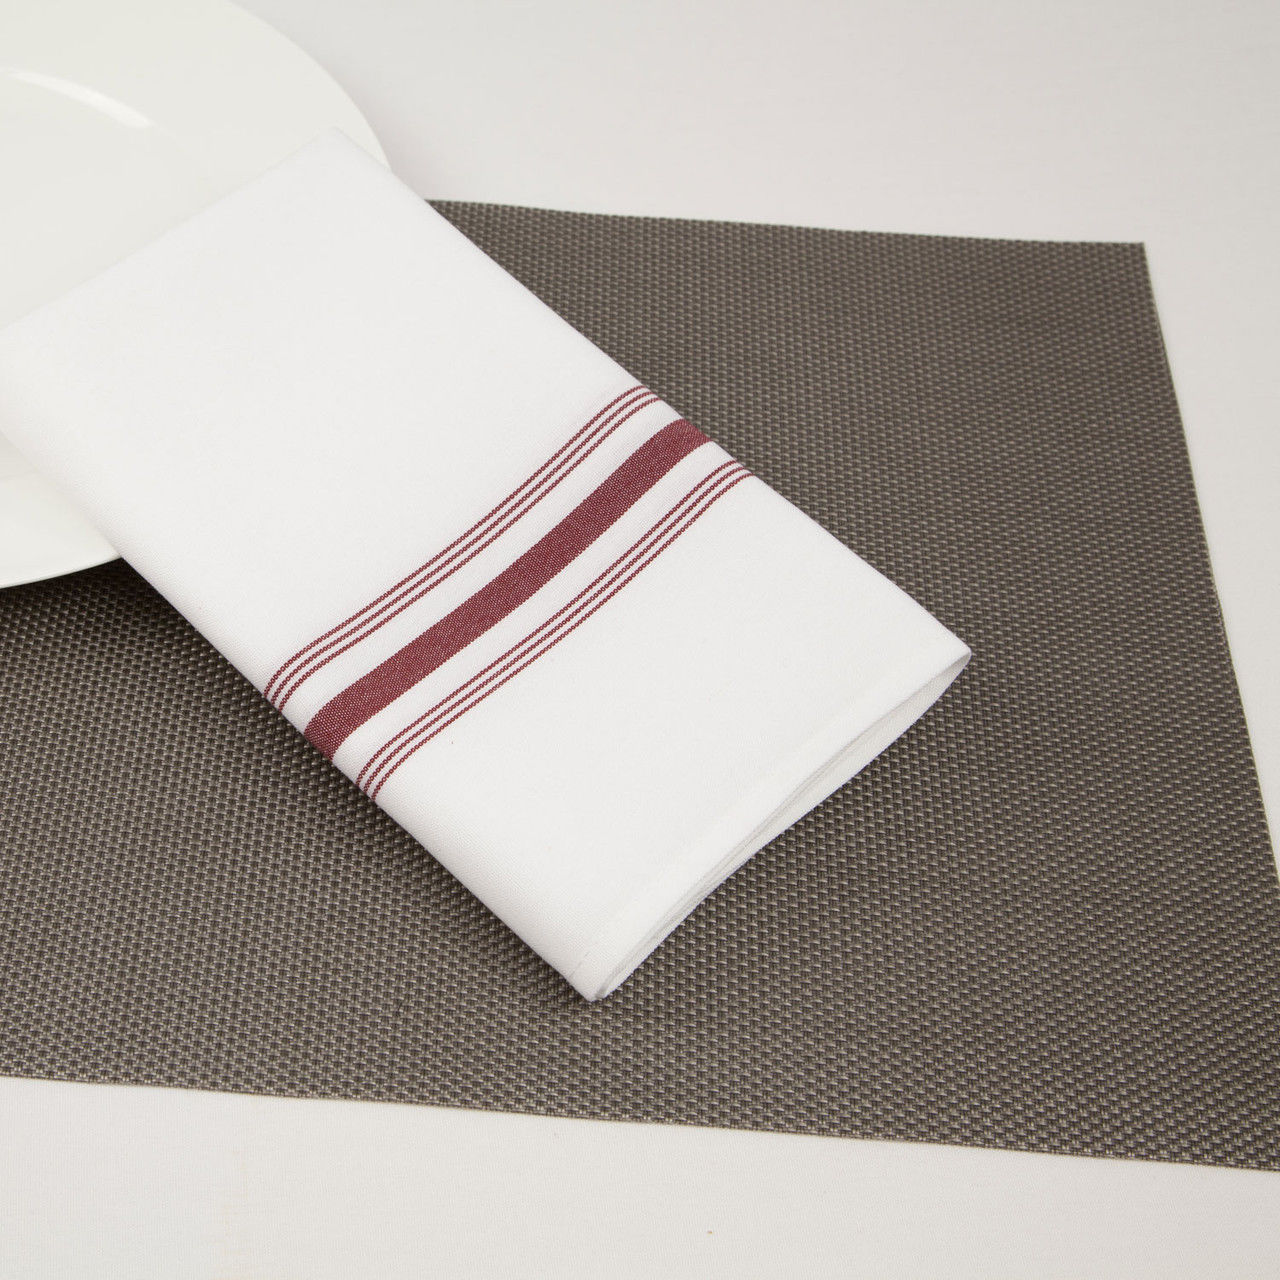 Where are these Riegel's Vinyl Woven Placemats ideal for use?